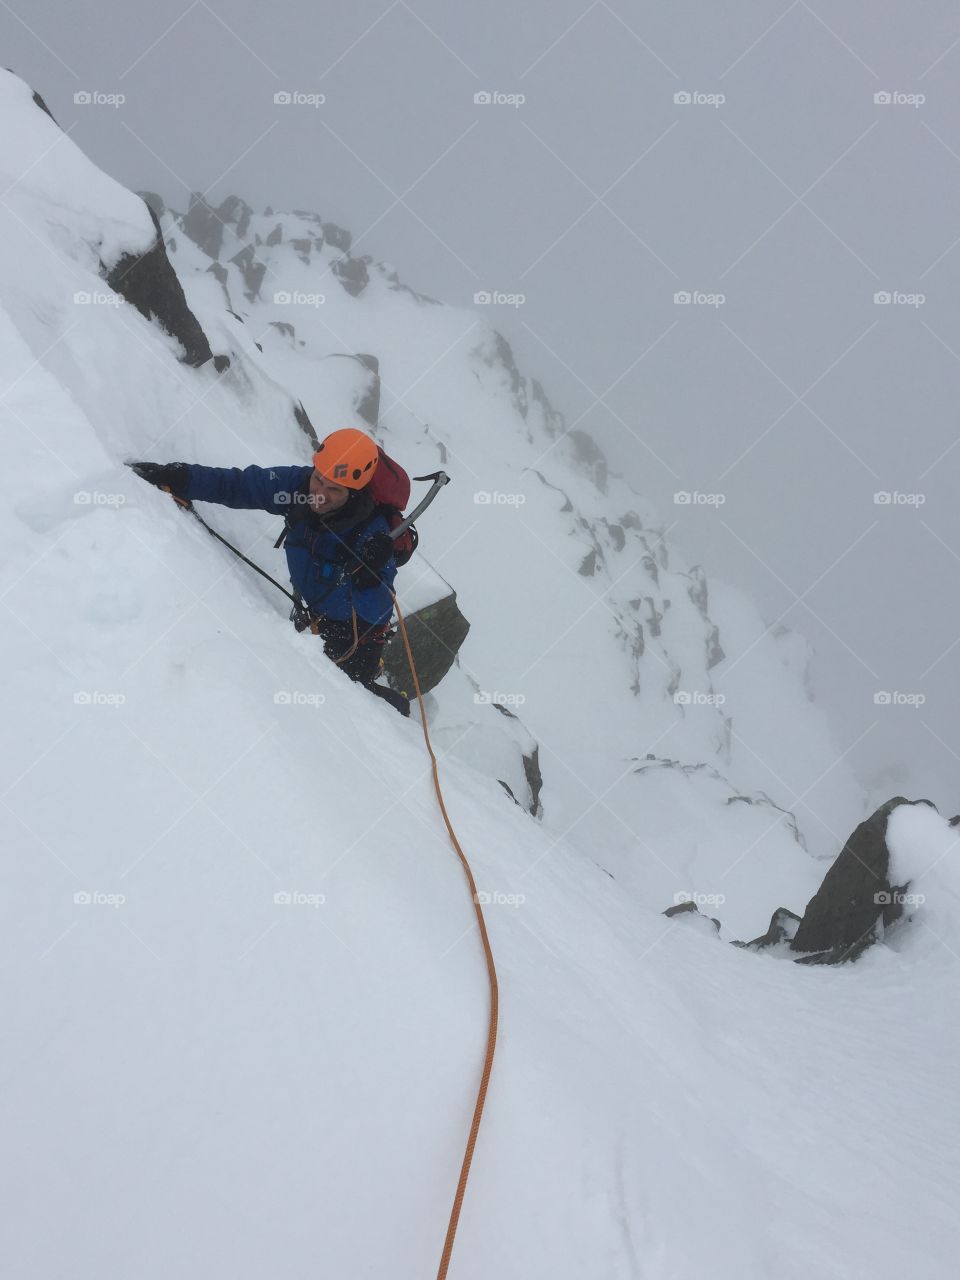 Male mountain climber going up snowy slope with rope